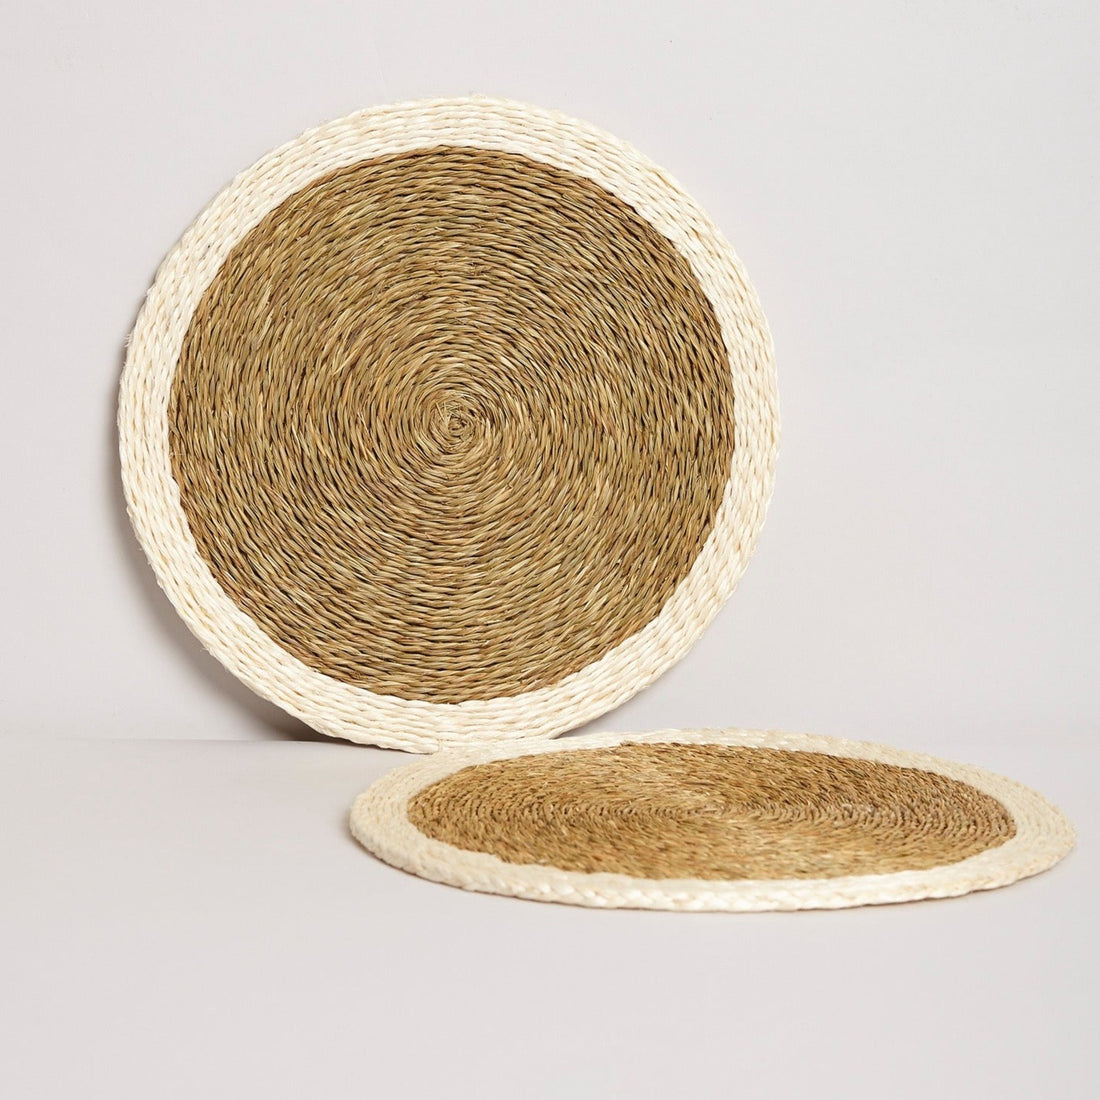 Woven Grass Placemats With Colour Trims